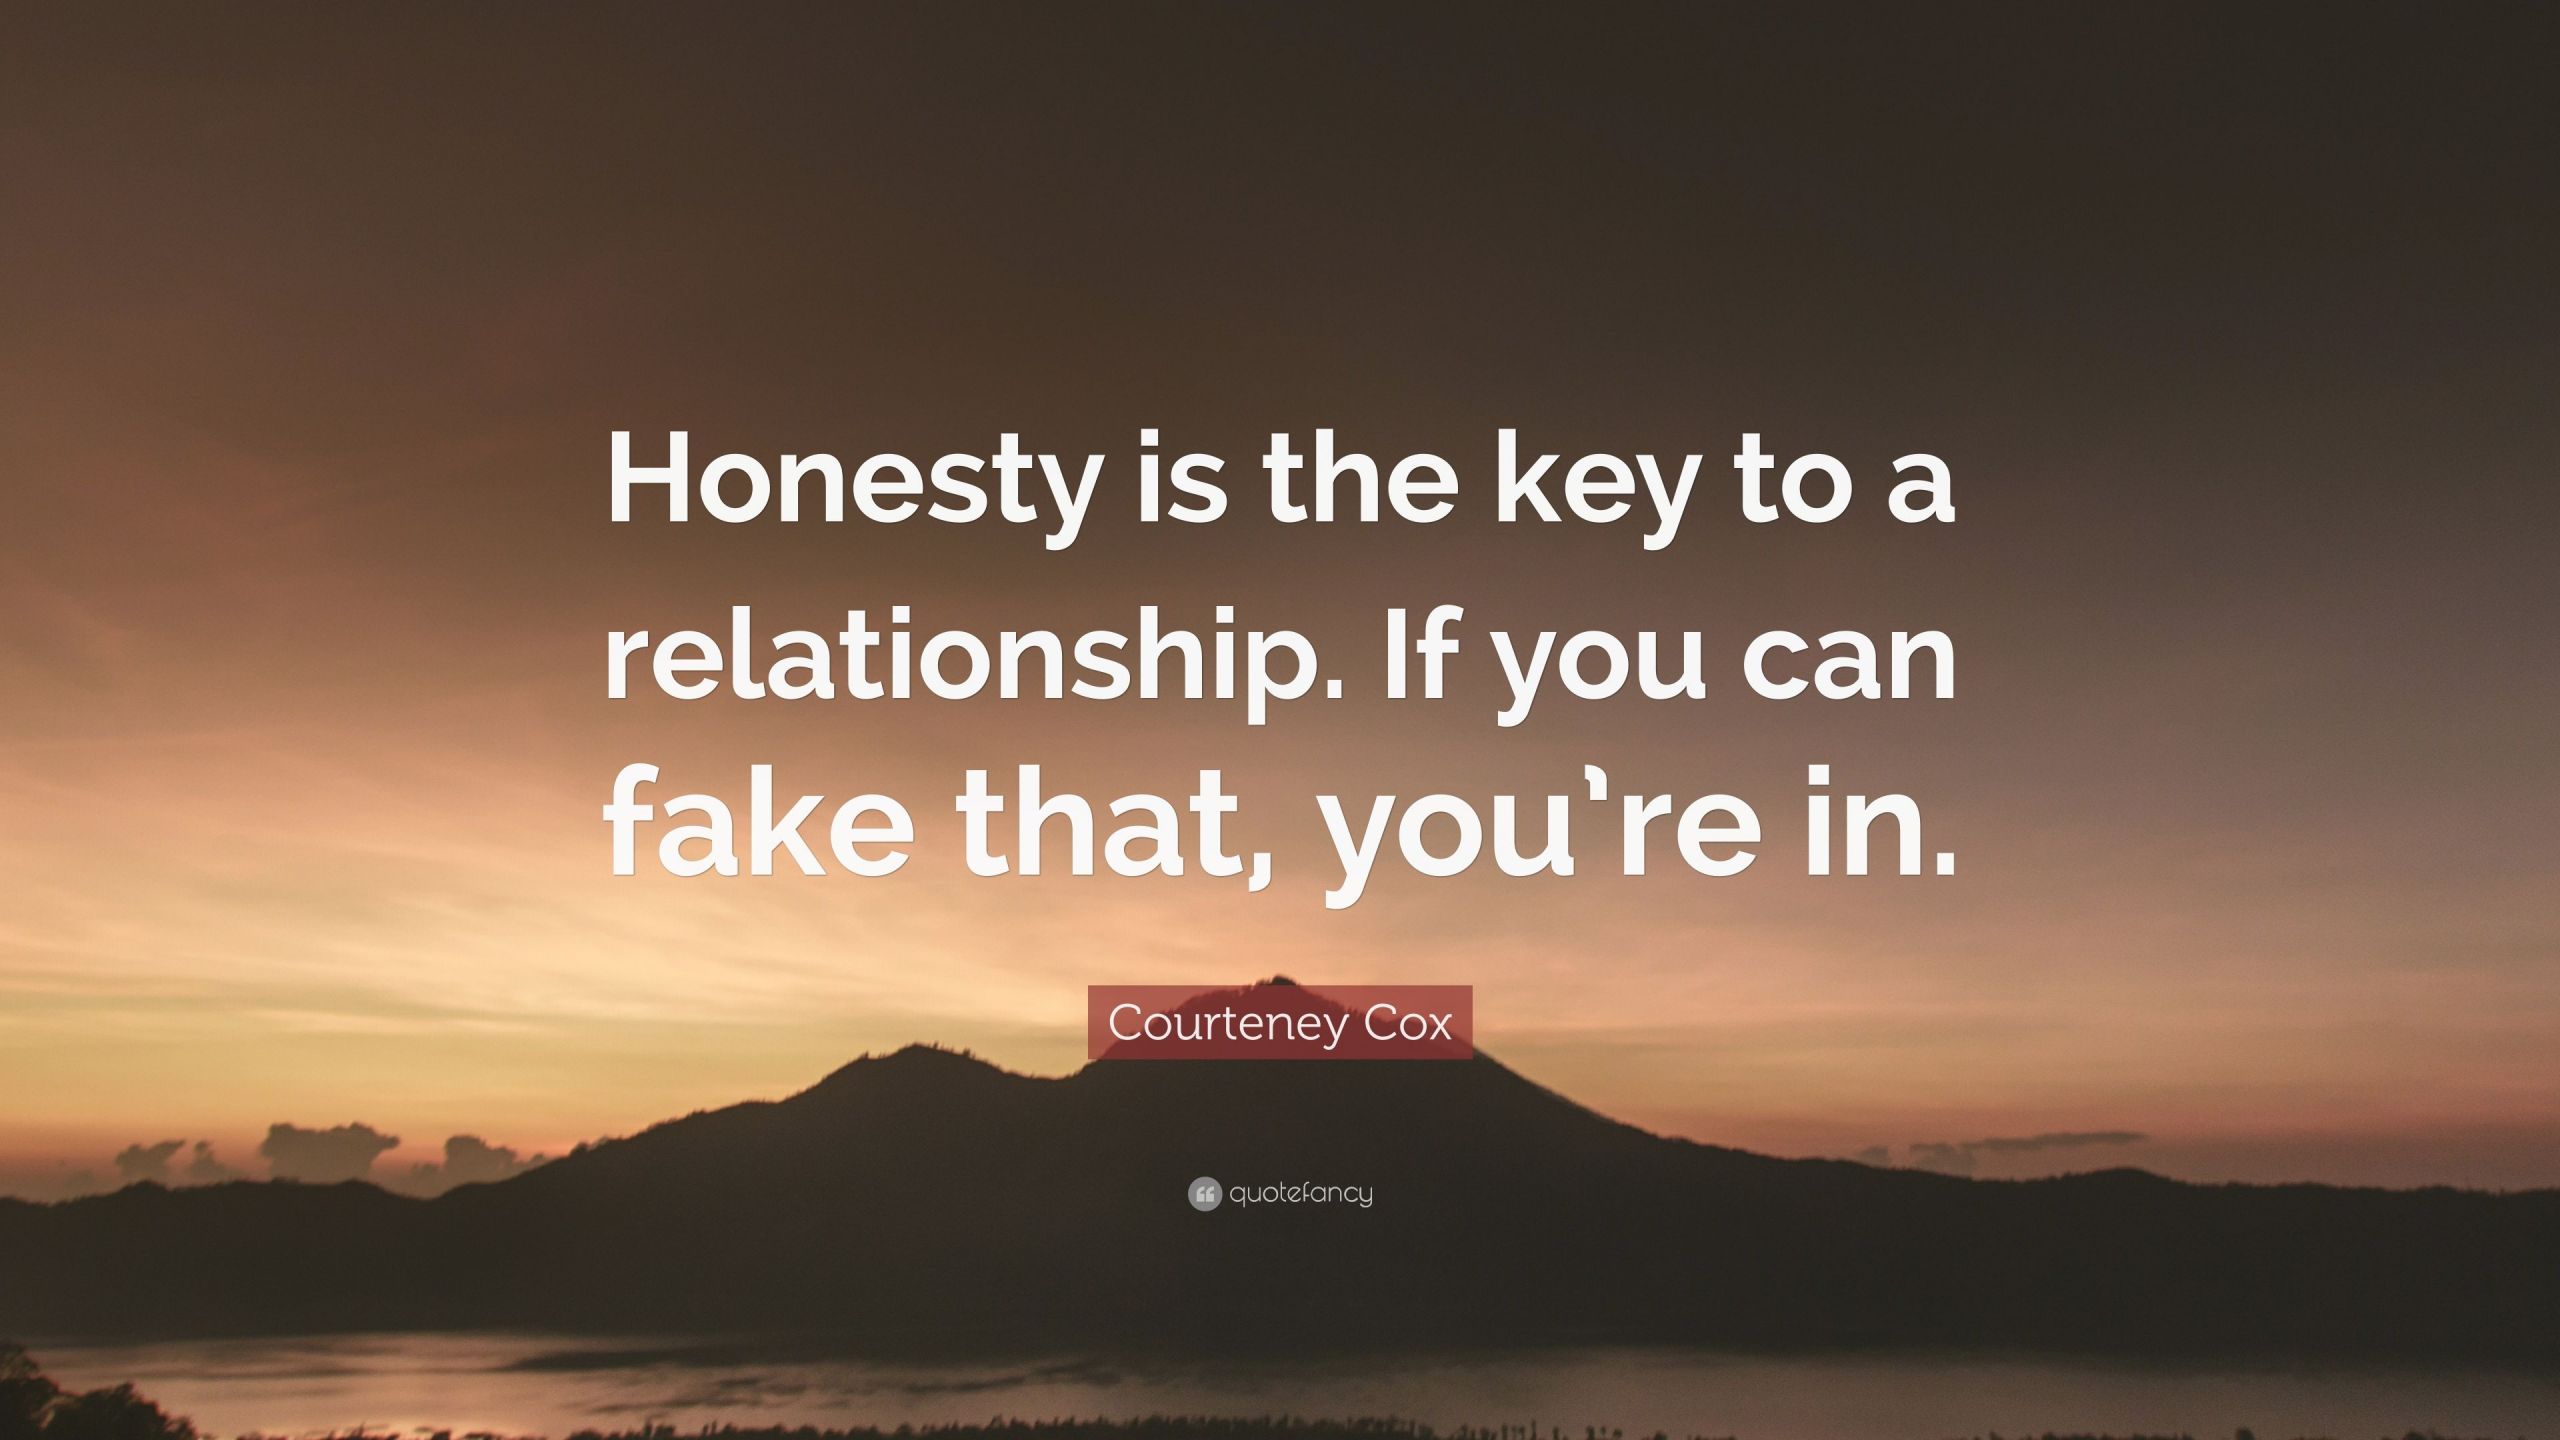 Quotes About Honesty In Relationships
 Courteney Cox Quote “Honesty is the key to a relationship